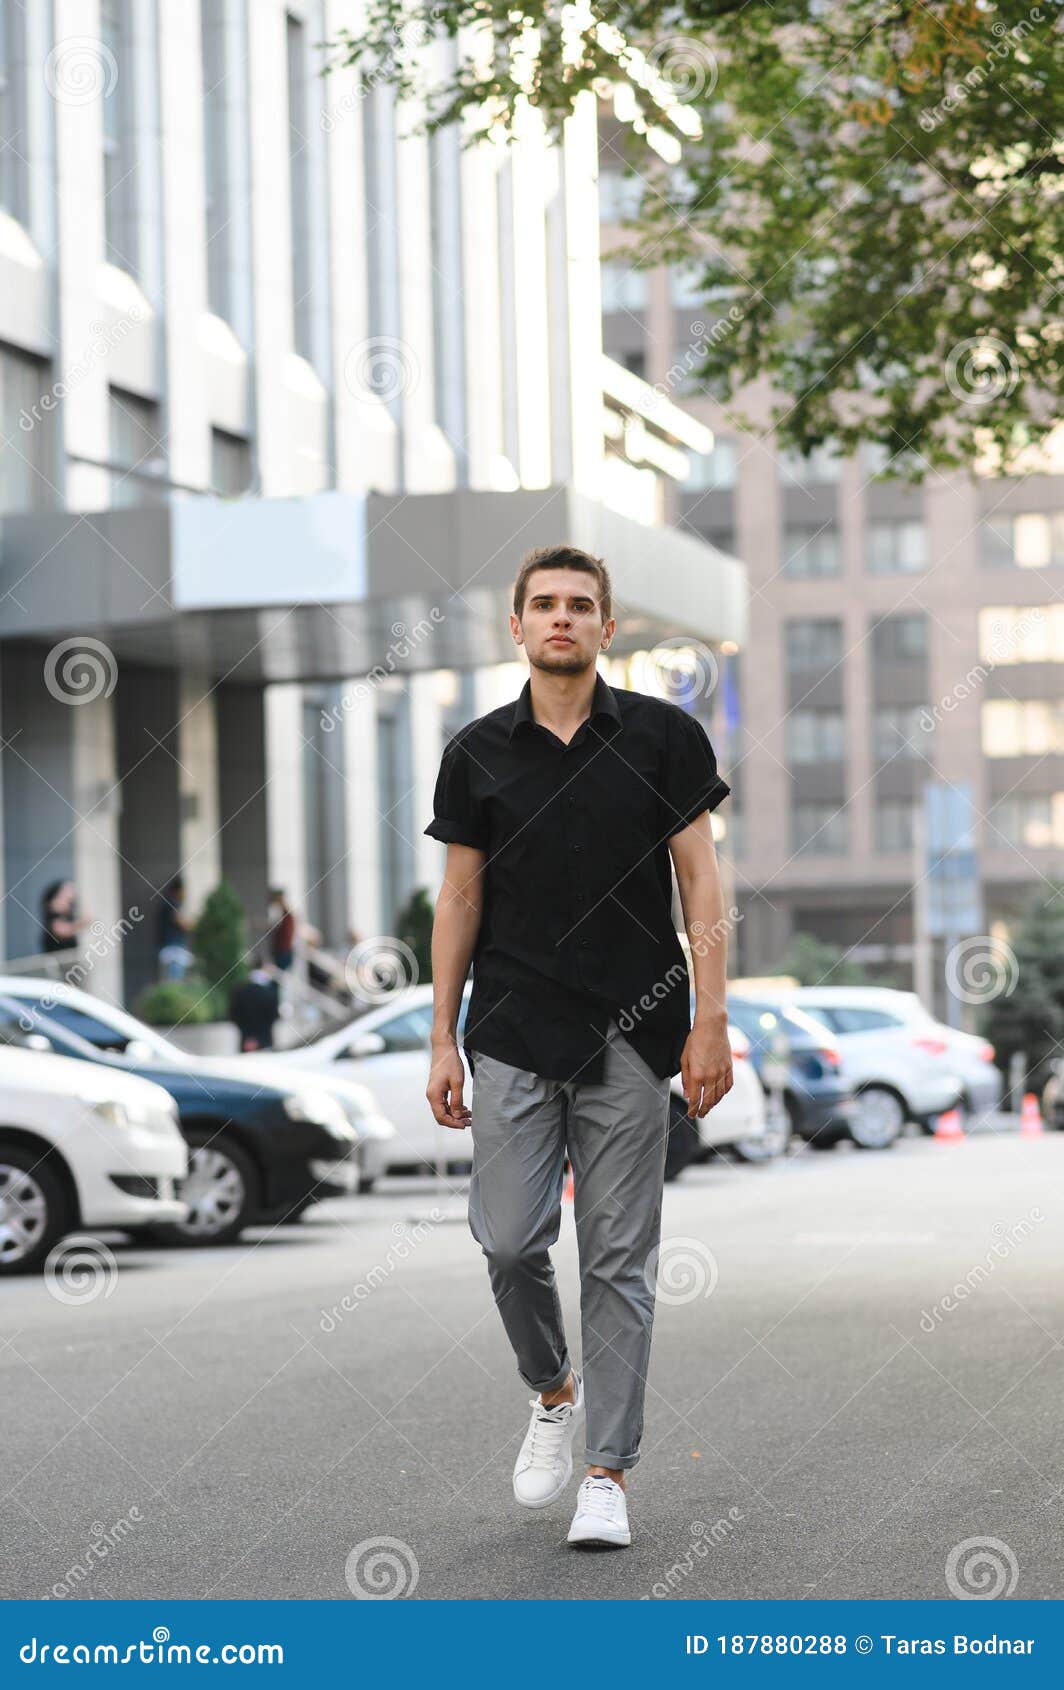 Black Pants with White and Black Shirt Casual Outfits For Men In